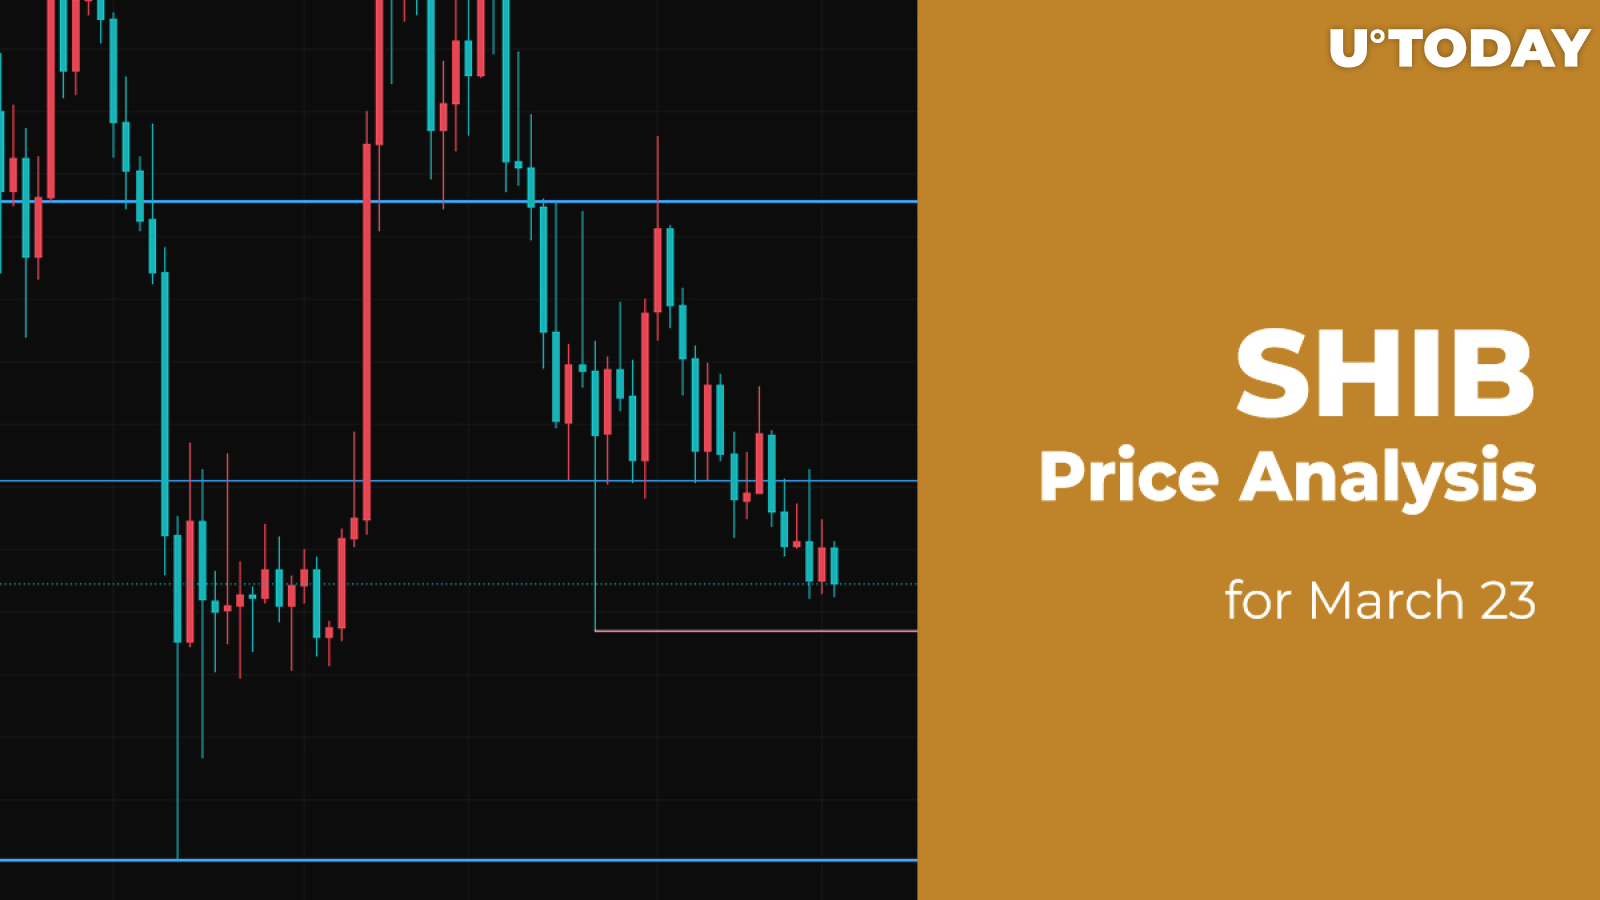 SHIB Price Analysis for March 23